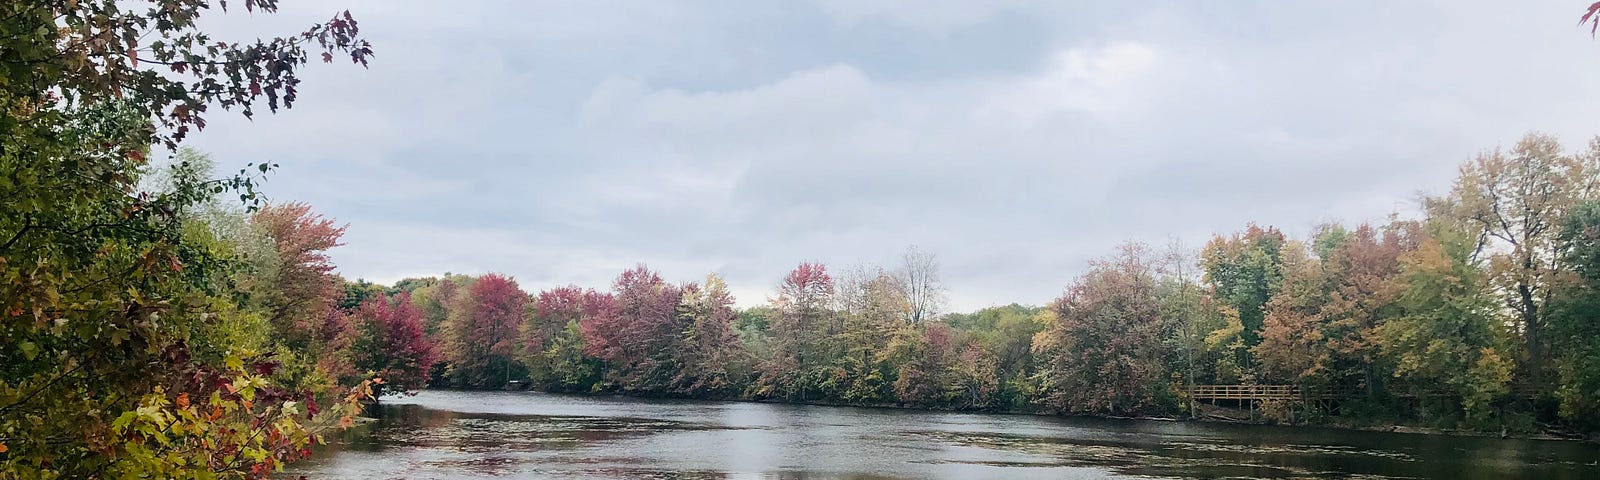 A park in Toronto with lake showing fall colors